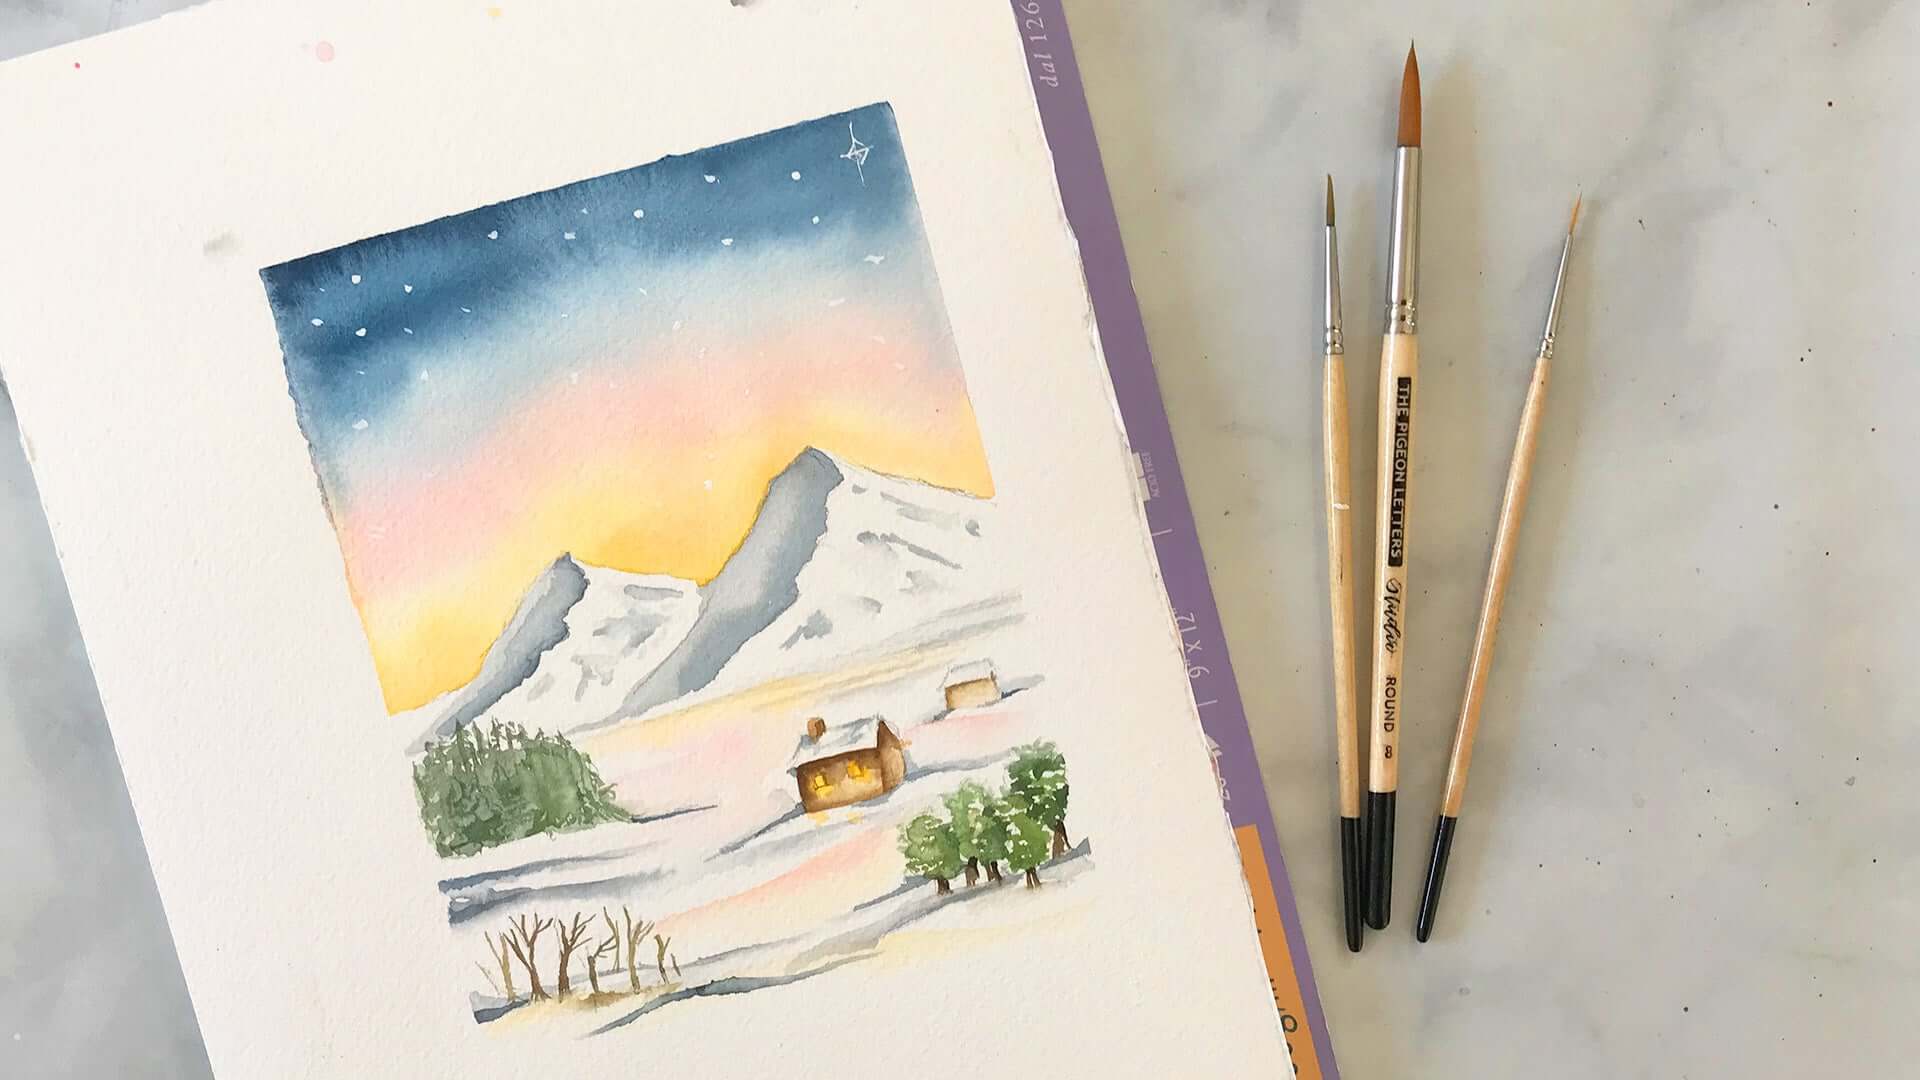 Watercolor Painting Tutorial: Create A Snowy Winter Landscape